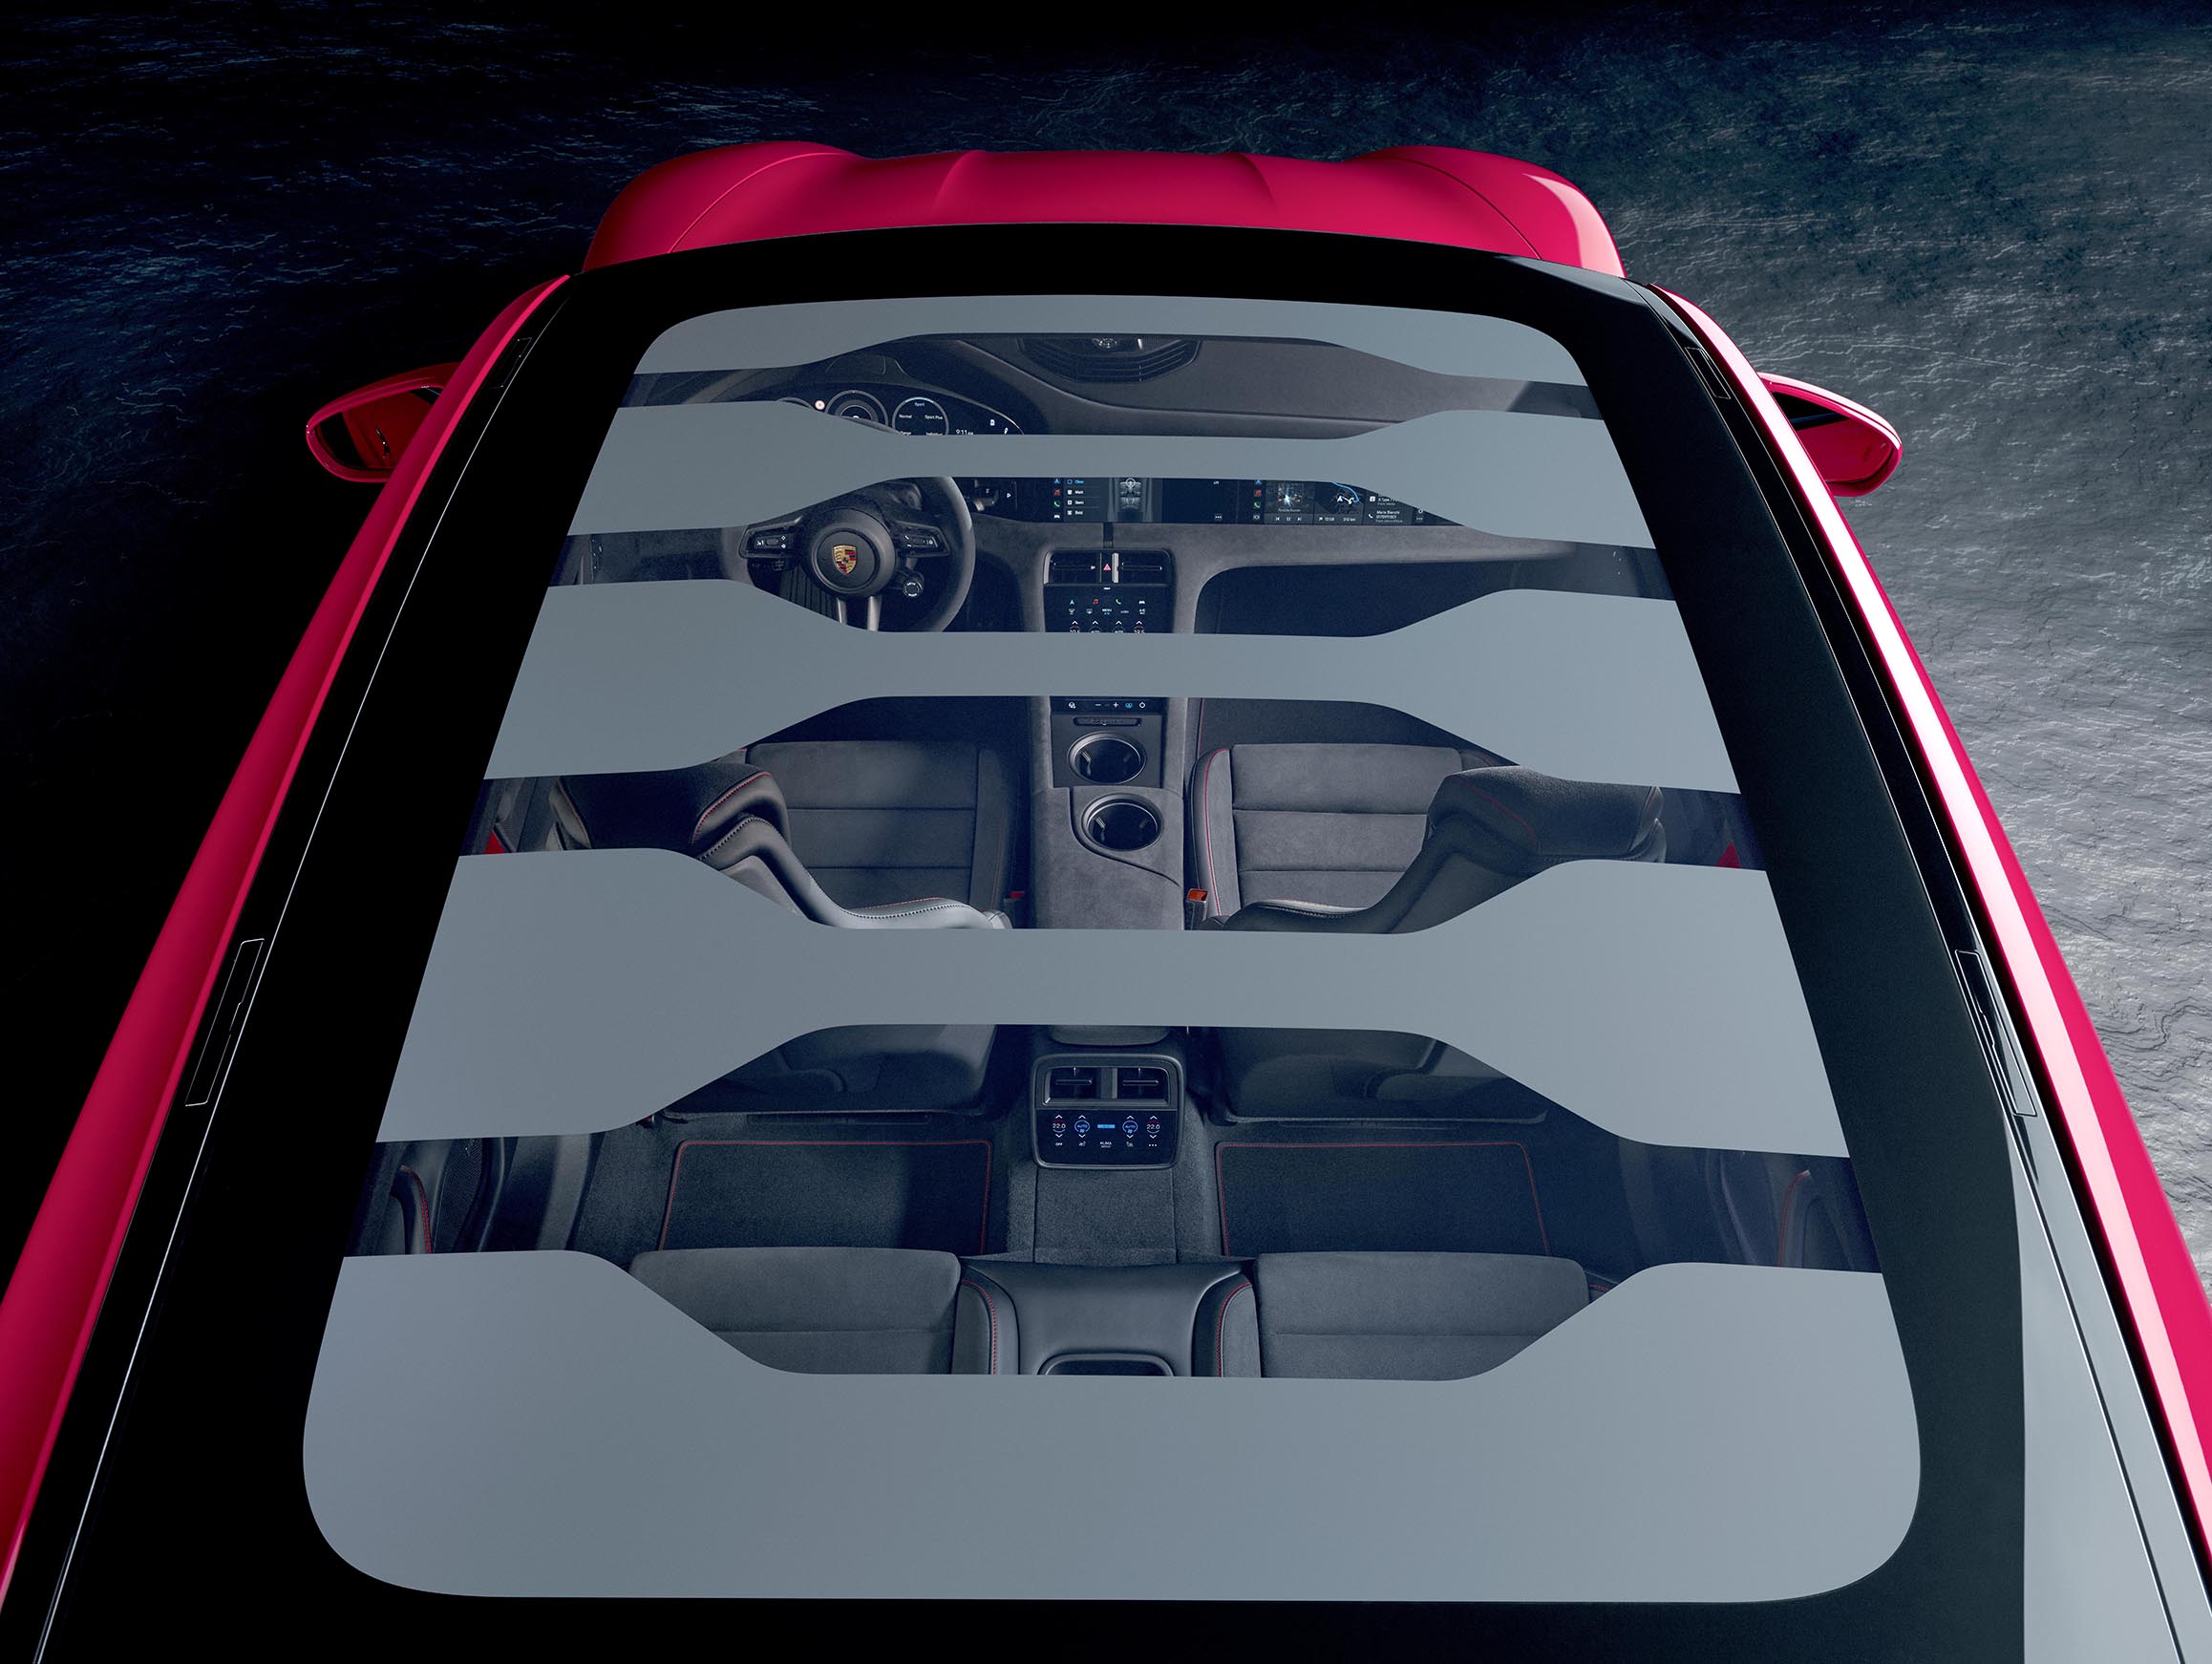 Panoramic Roof with variable Light Control on the Porsche Taycan